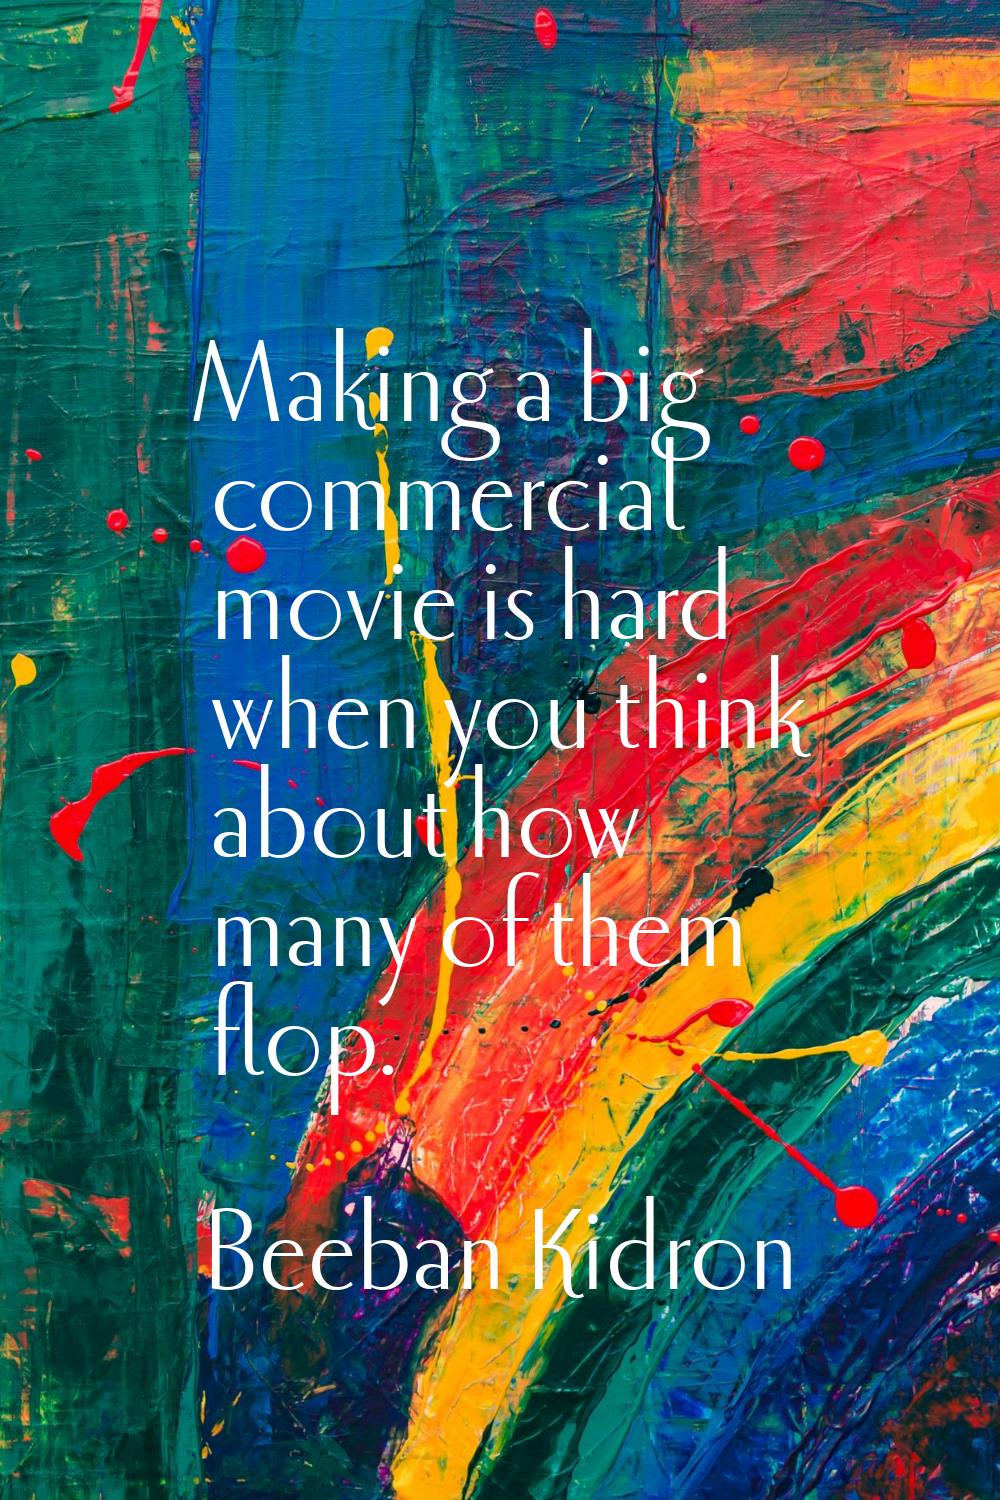 Making a big commercial movie is hard when you think about how many of them flop.